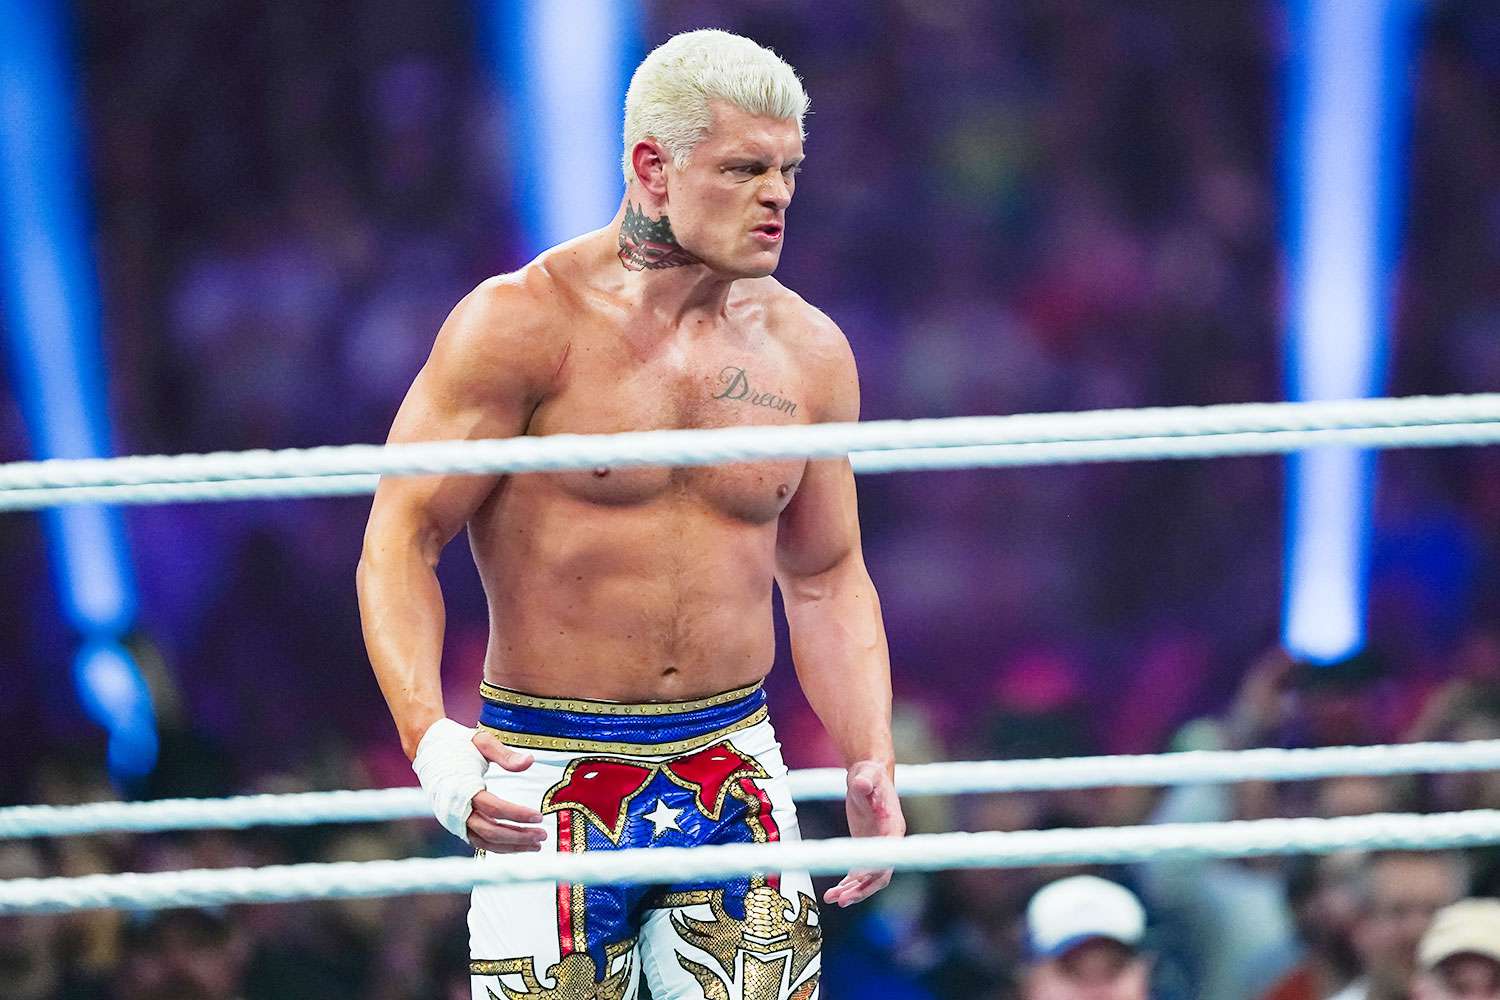 Cody Rhodes Ranked as One of the Highest WWE Merchandise Sellers in February